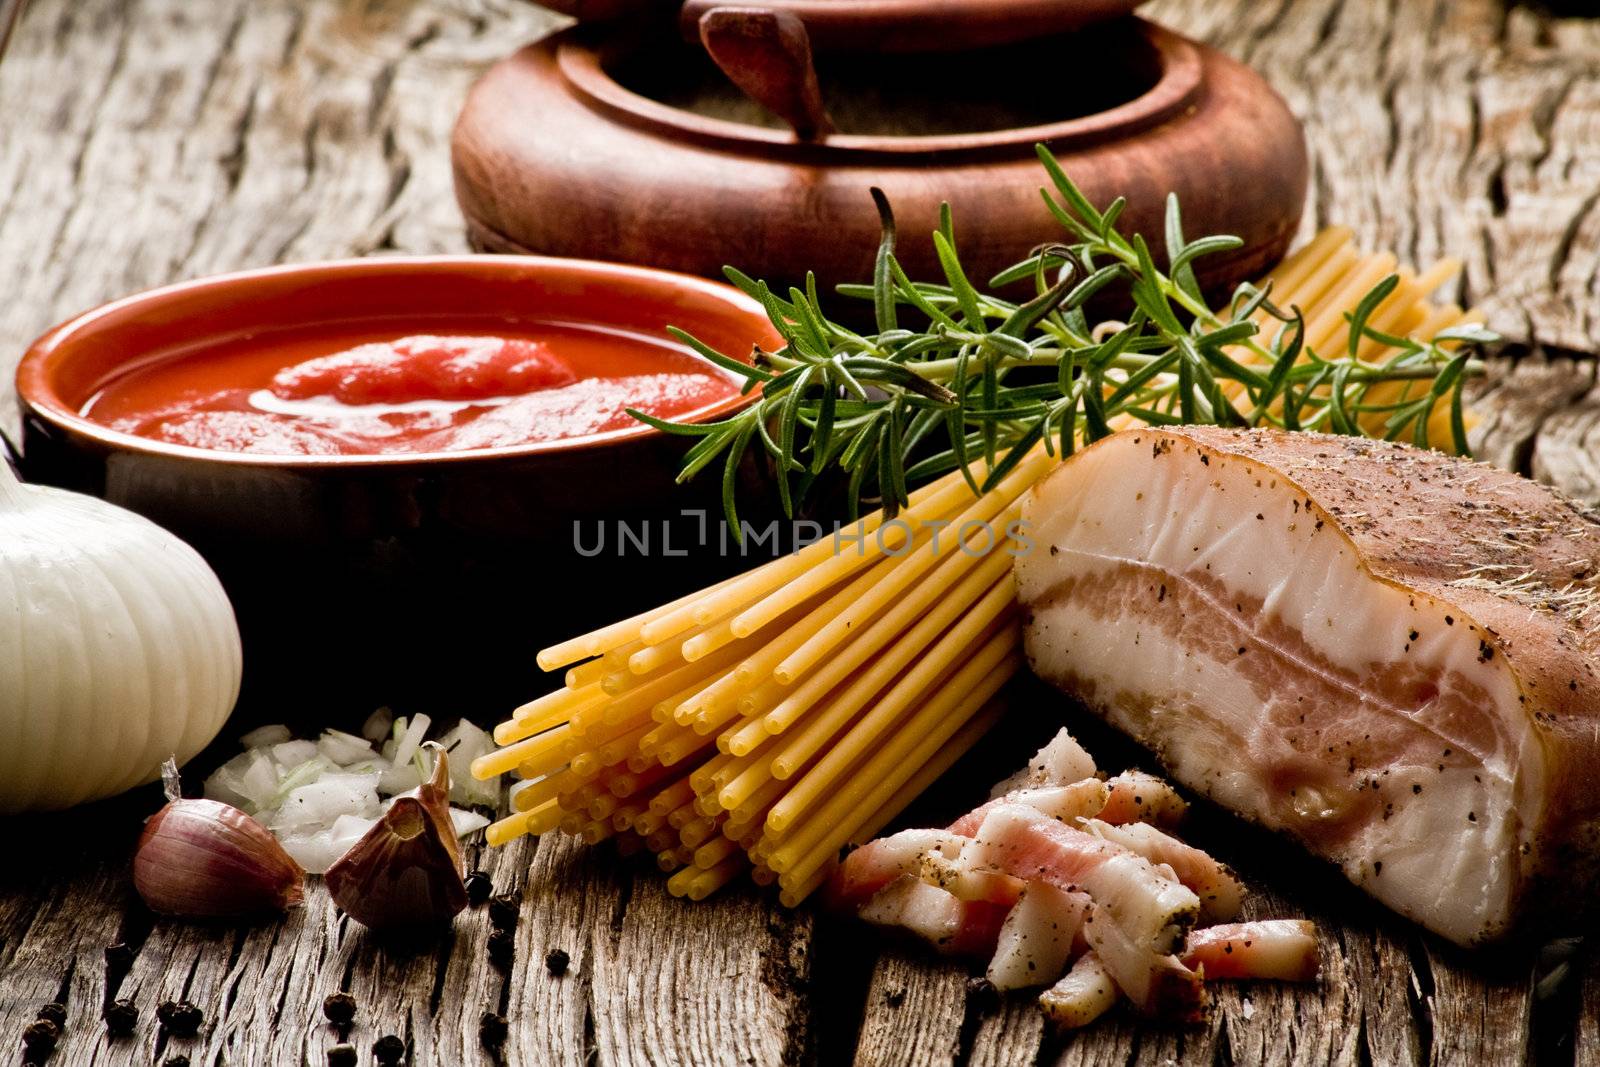 amatriciana ingredients by maxg71